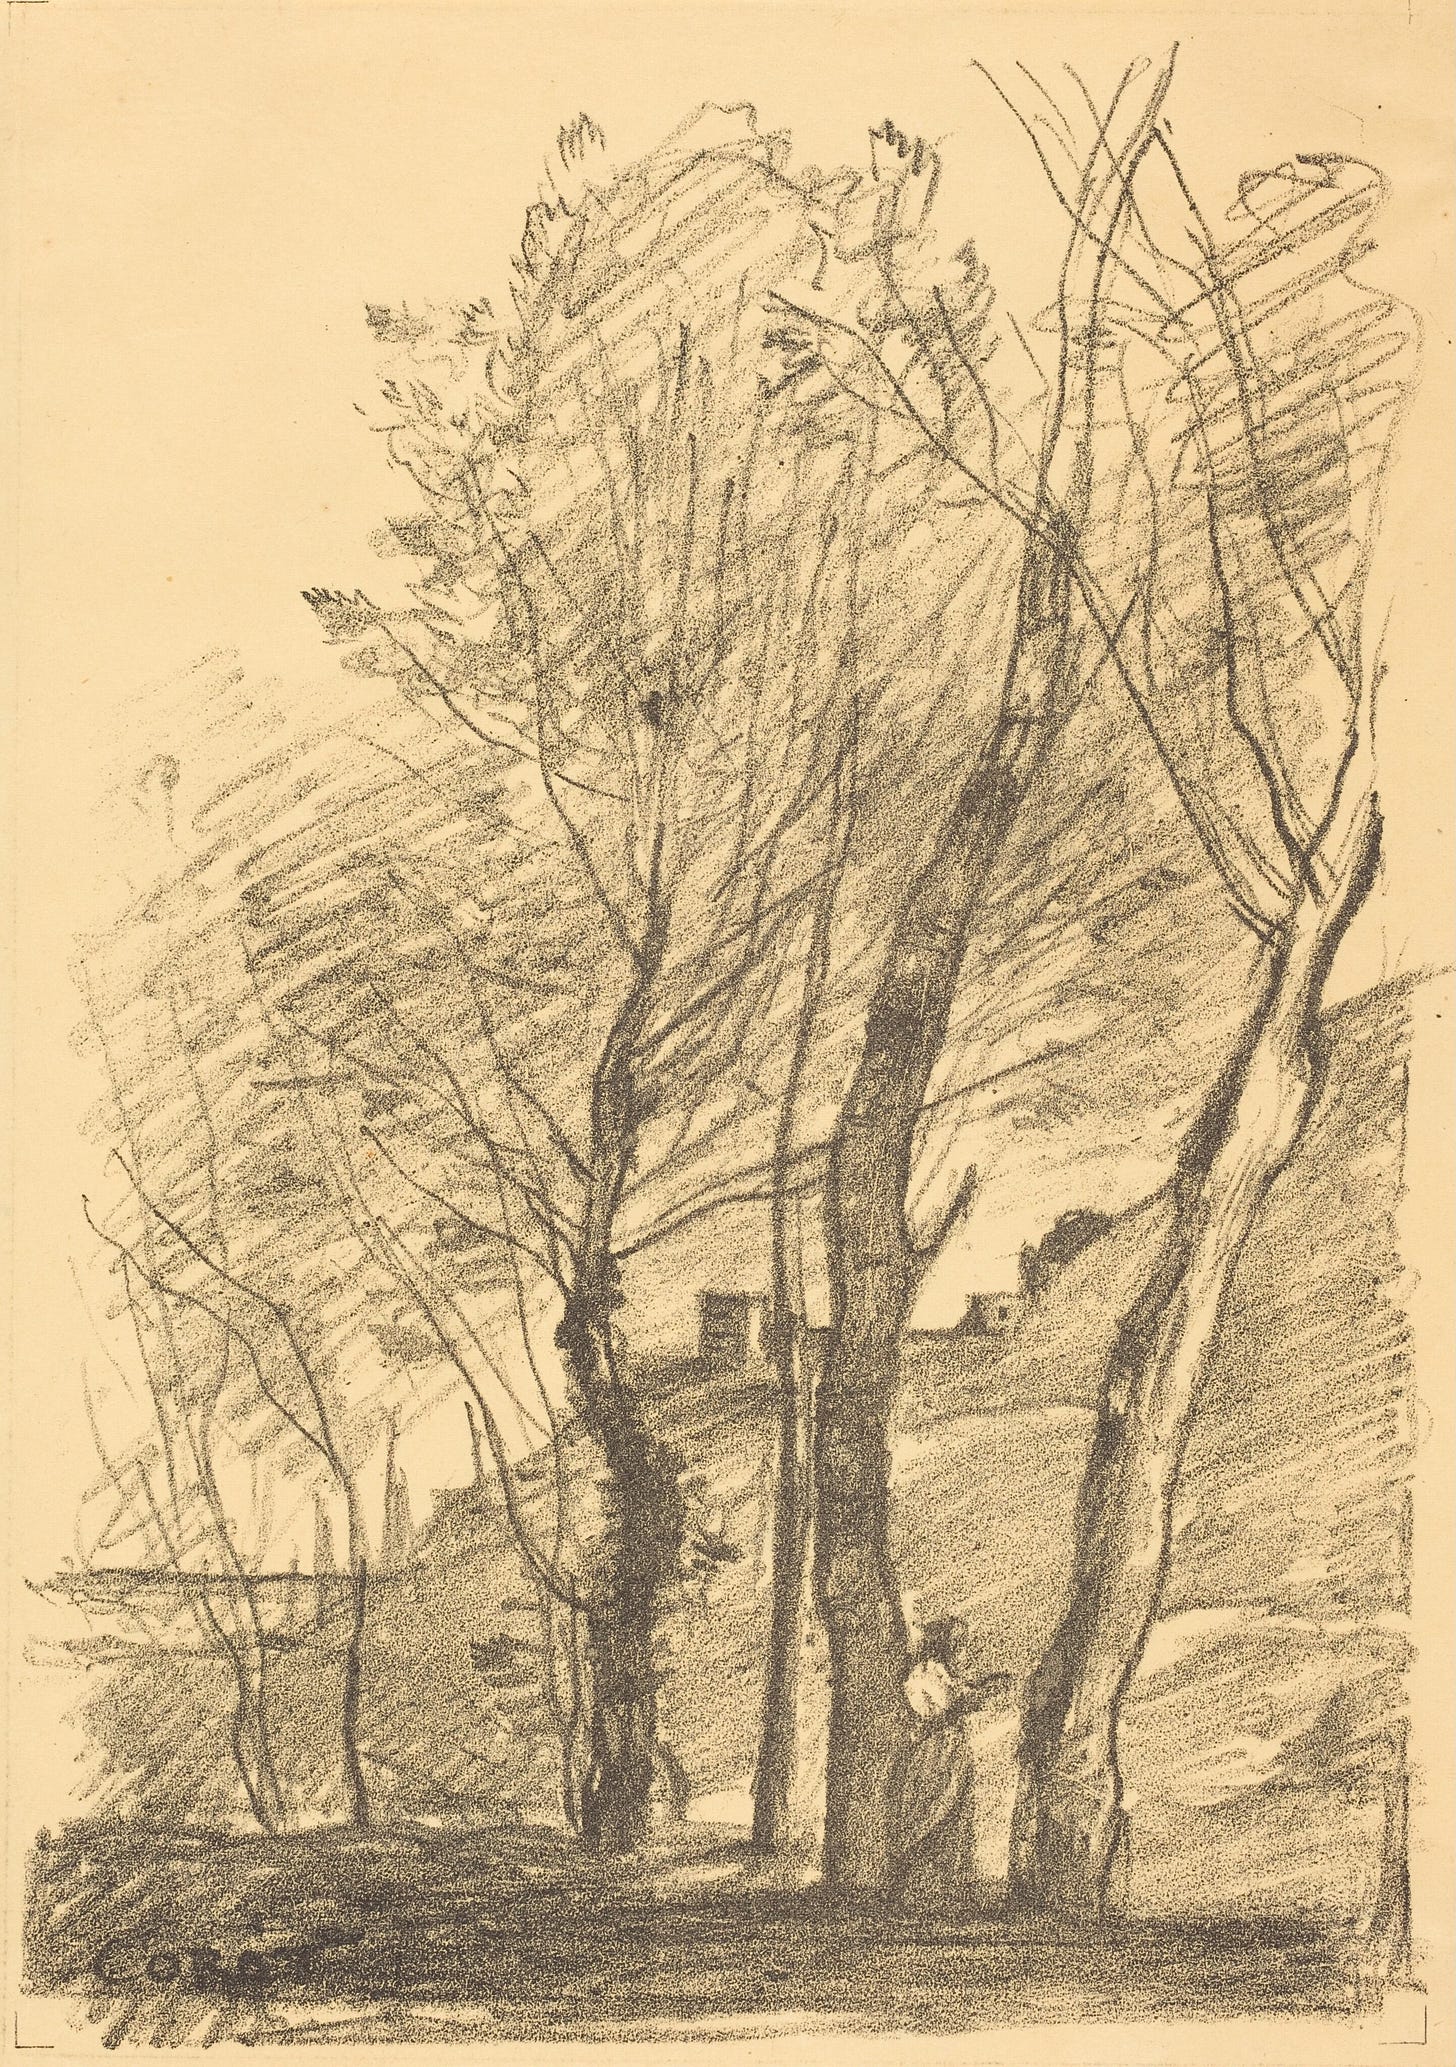 Sketch in pencil of a woman reading underneath trees